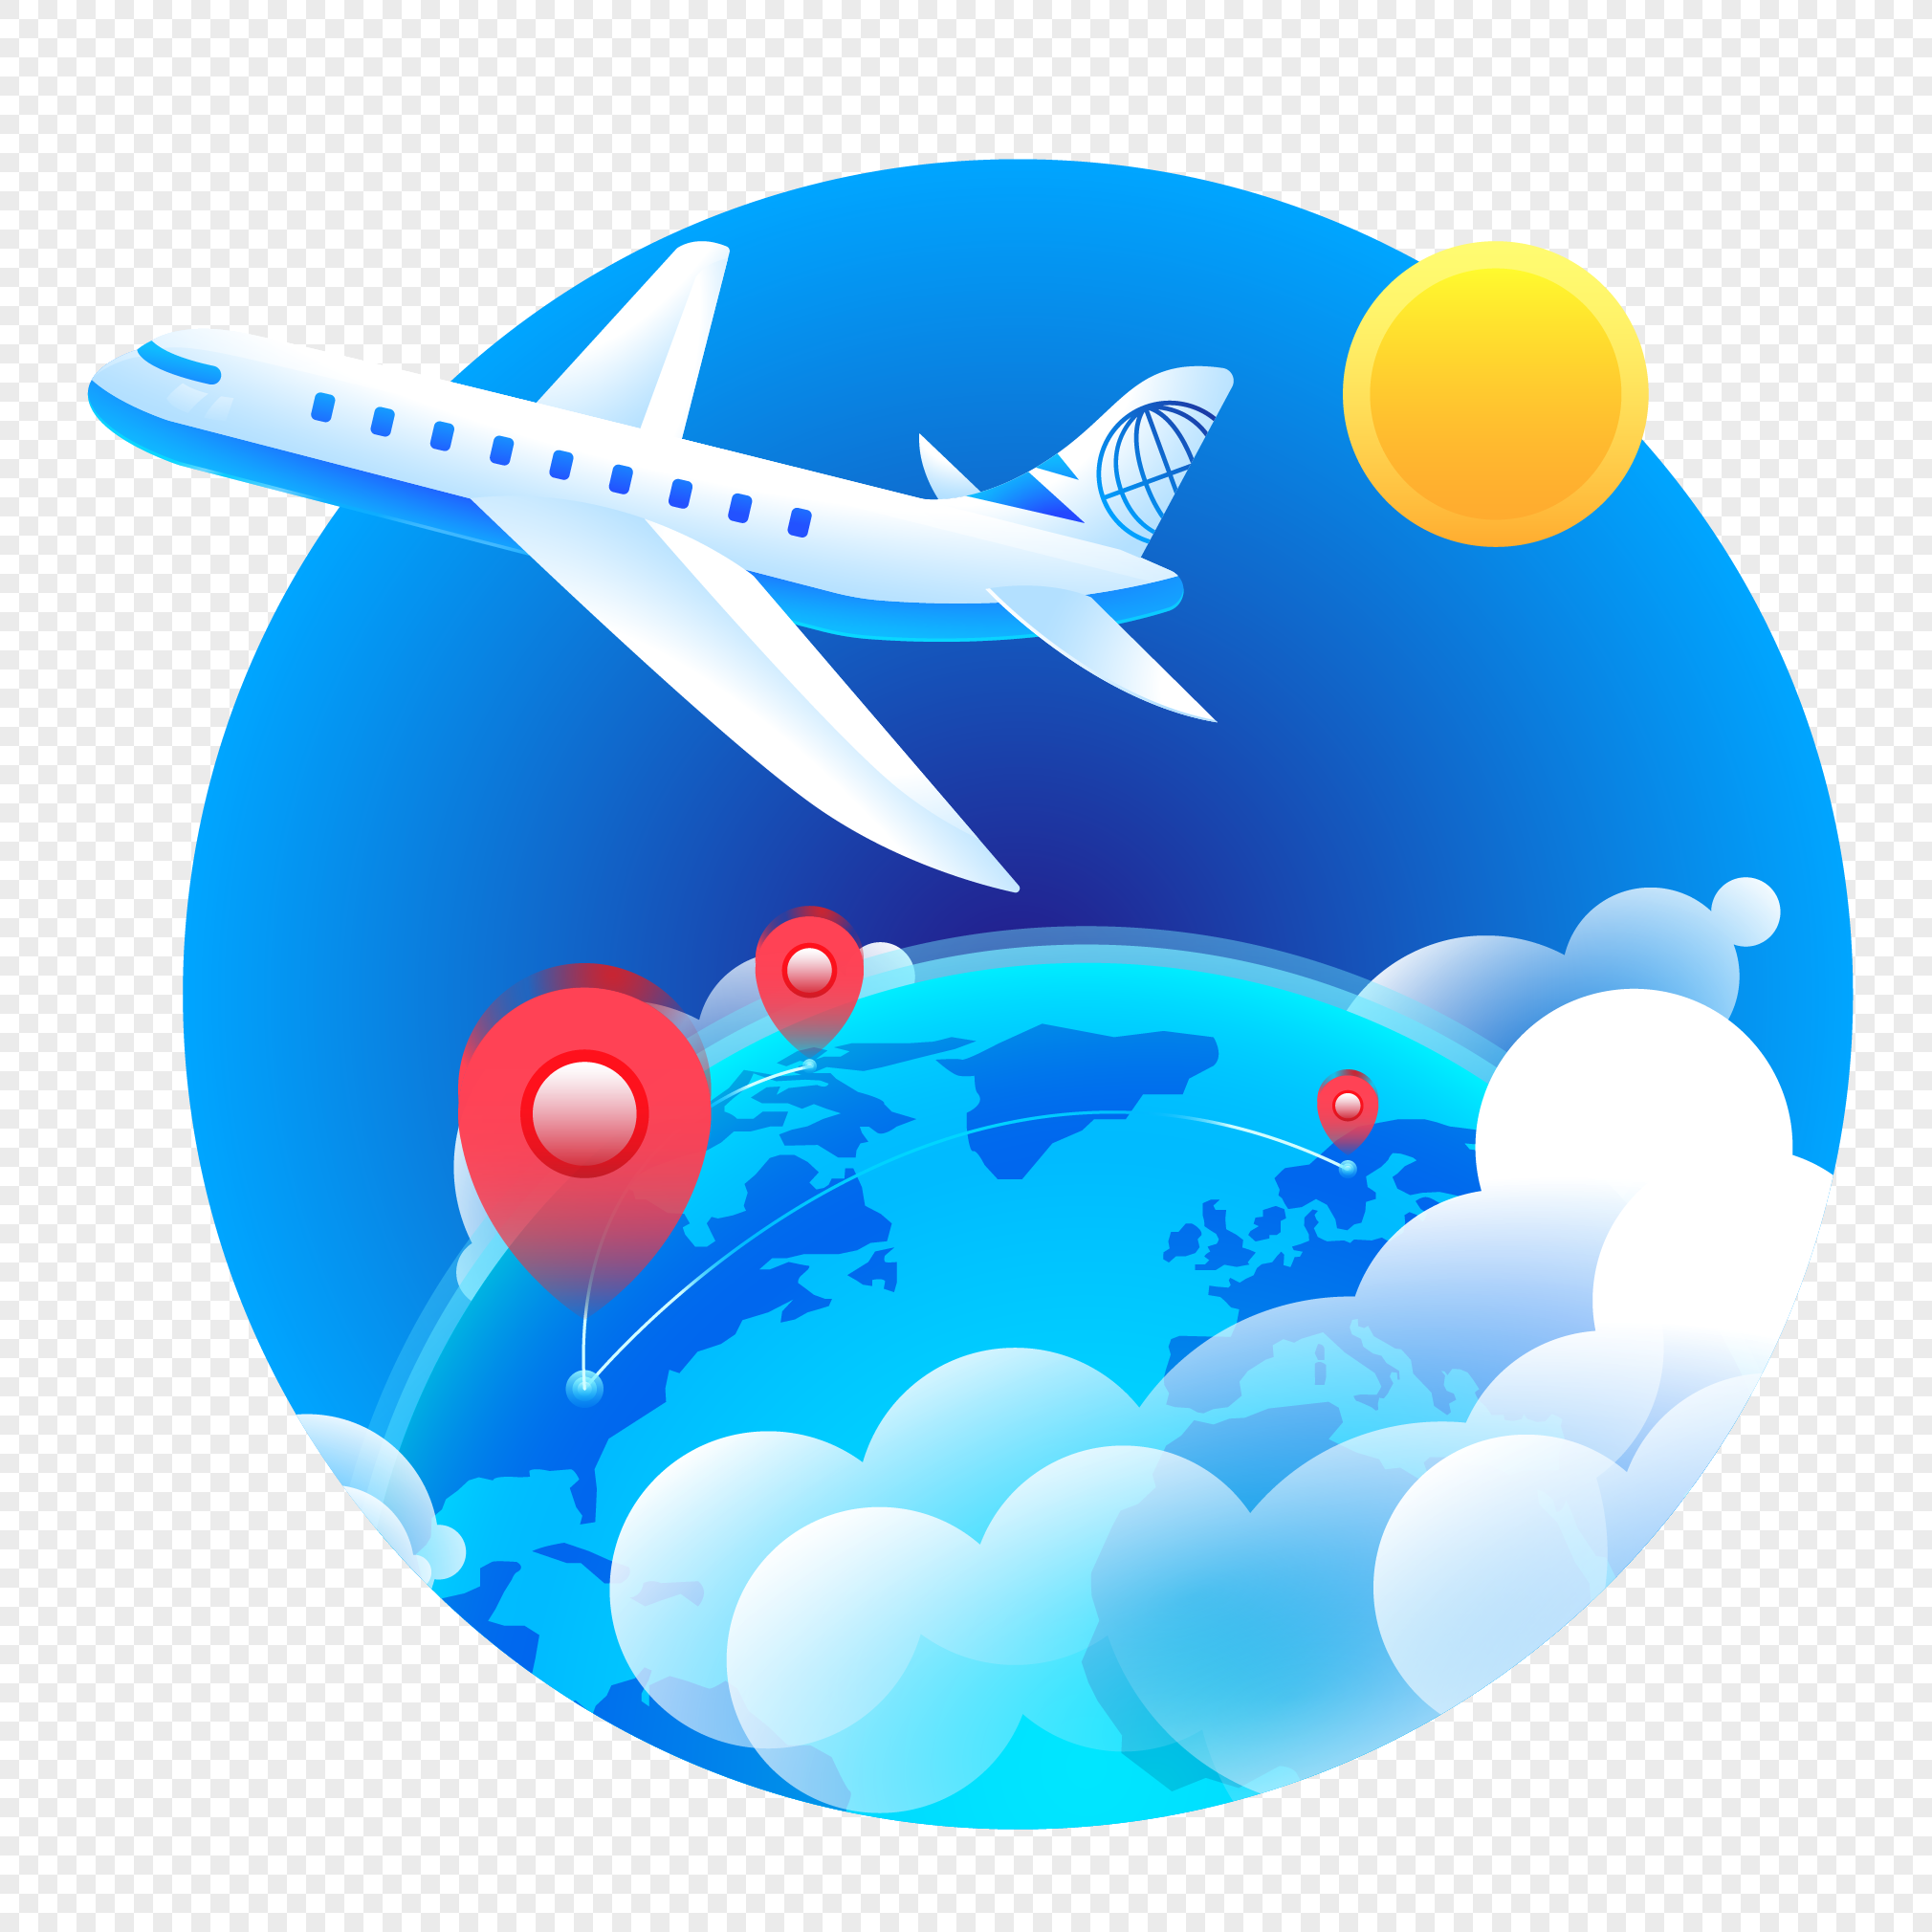 Travel vector material, earth, material, travel png hd transparent image